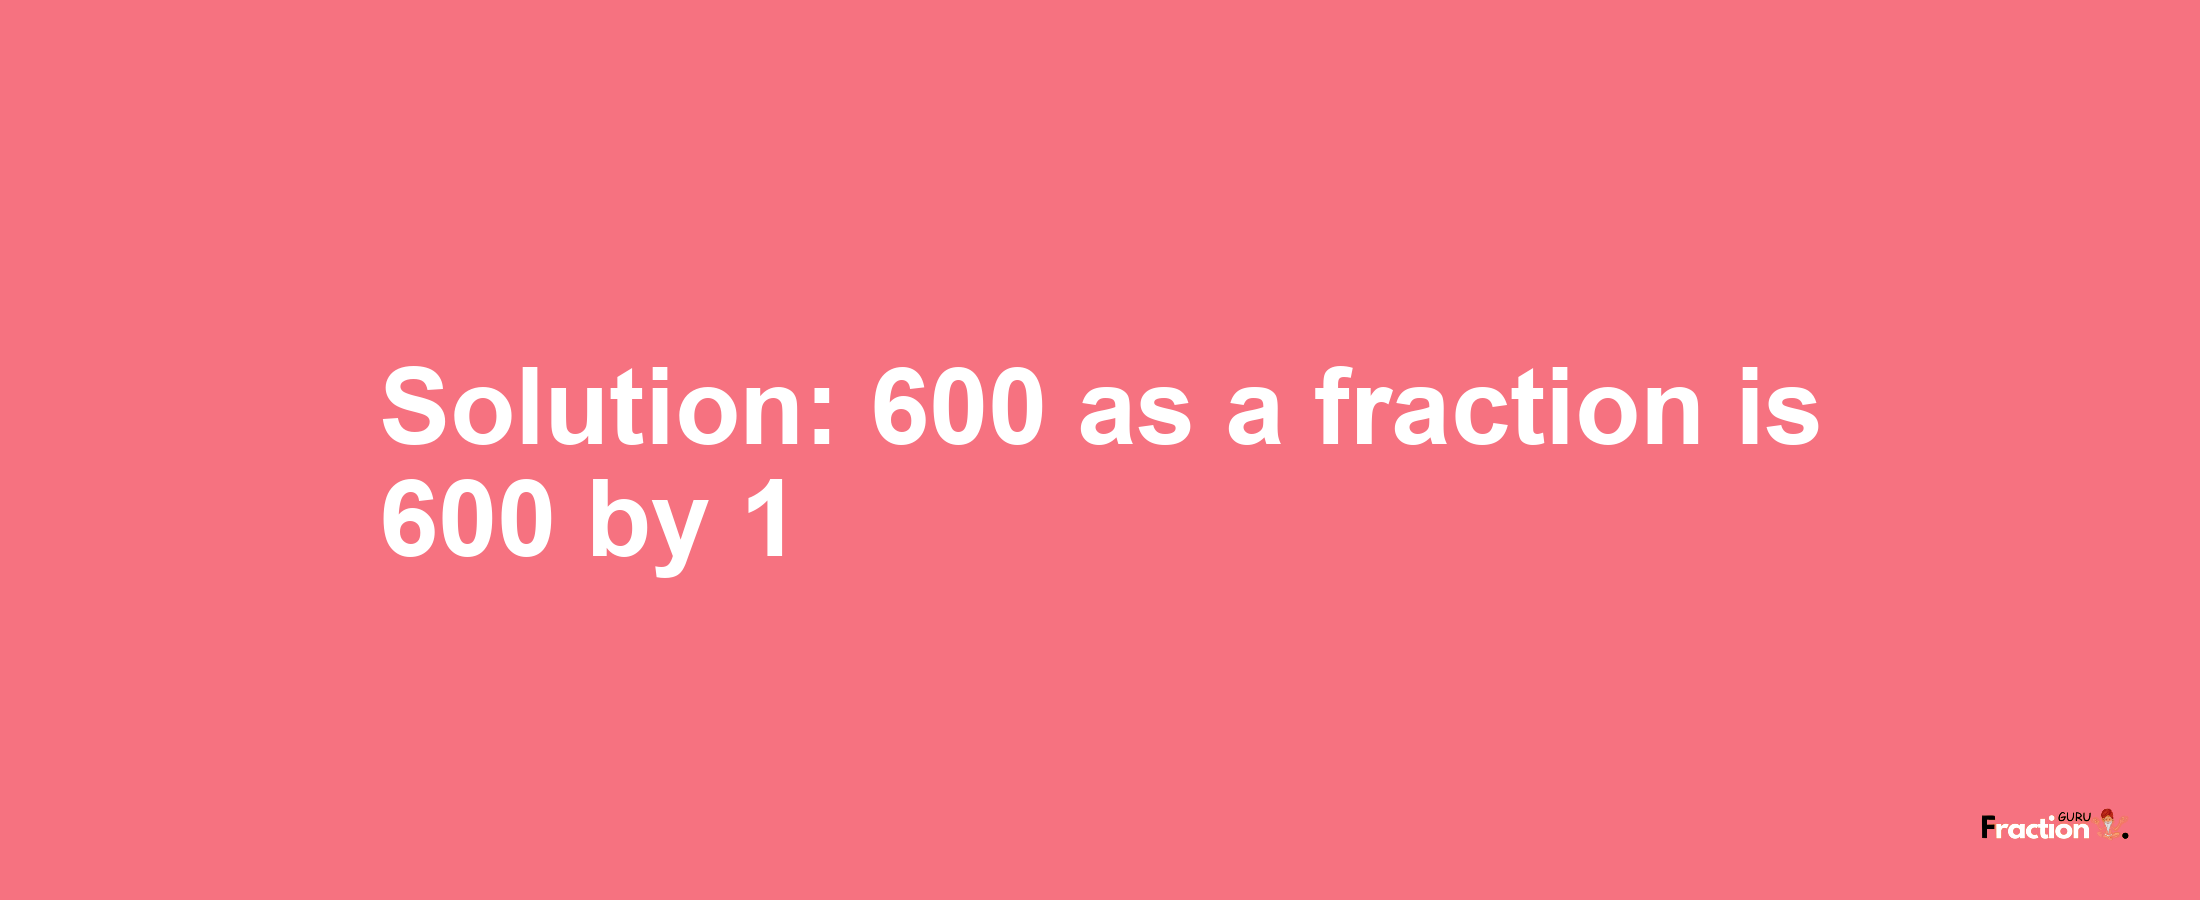 Solution:600 as a fraction is 600/1